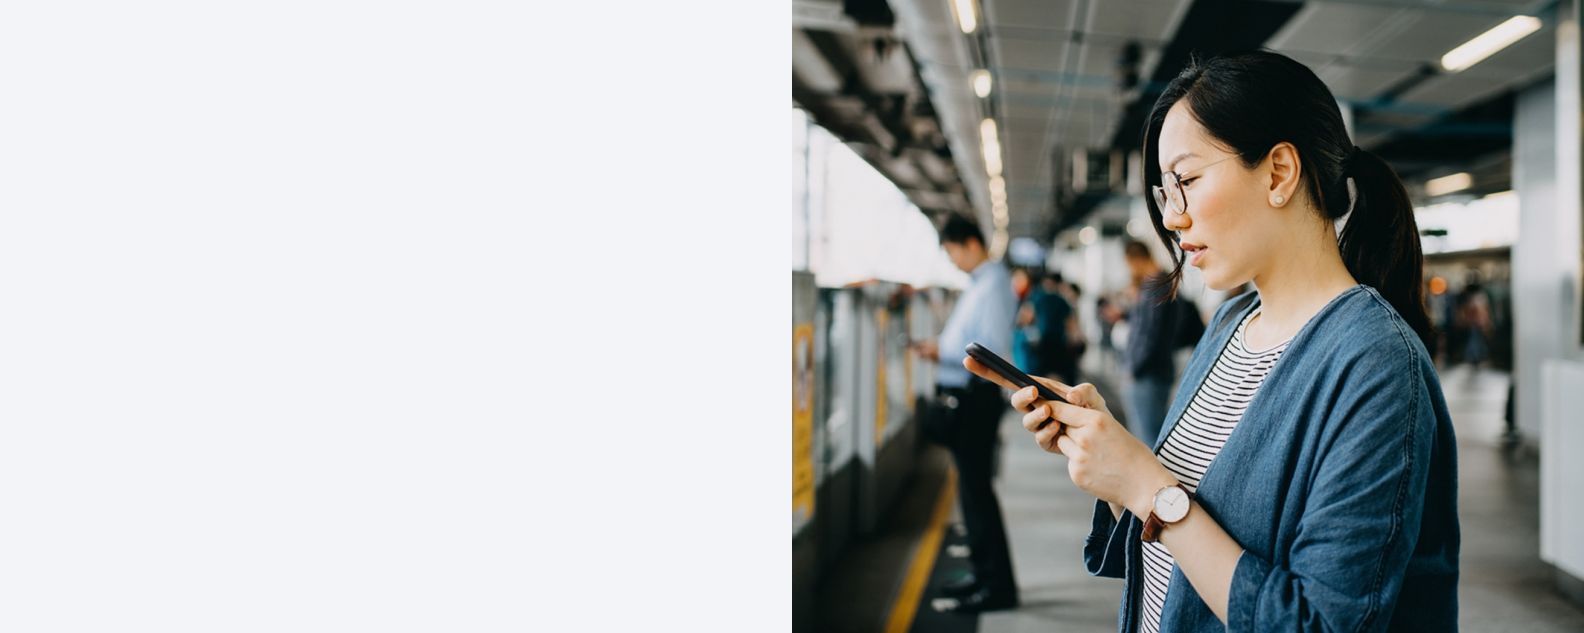 Young woman using mobile phone in subway station platform